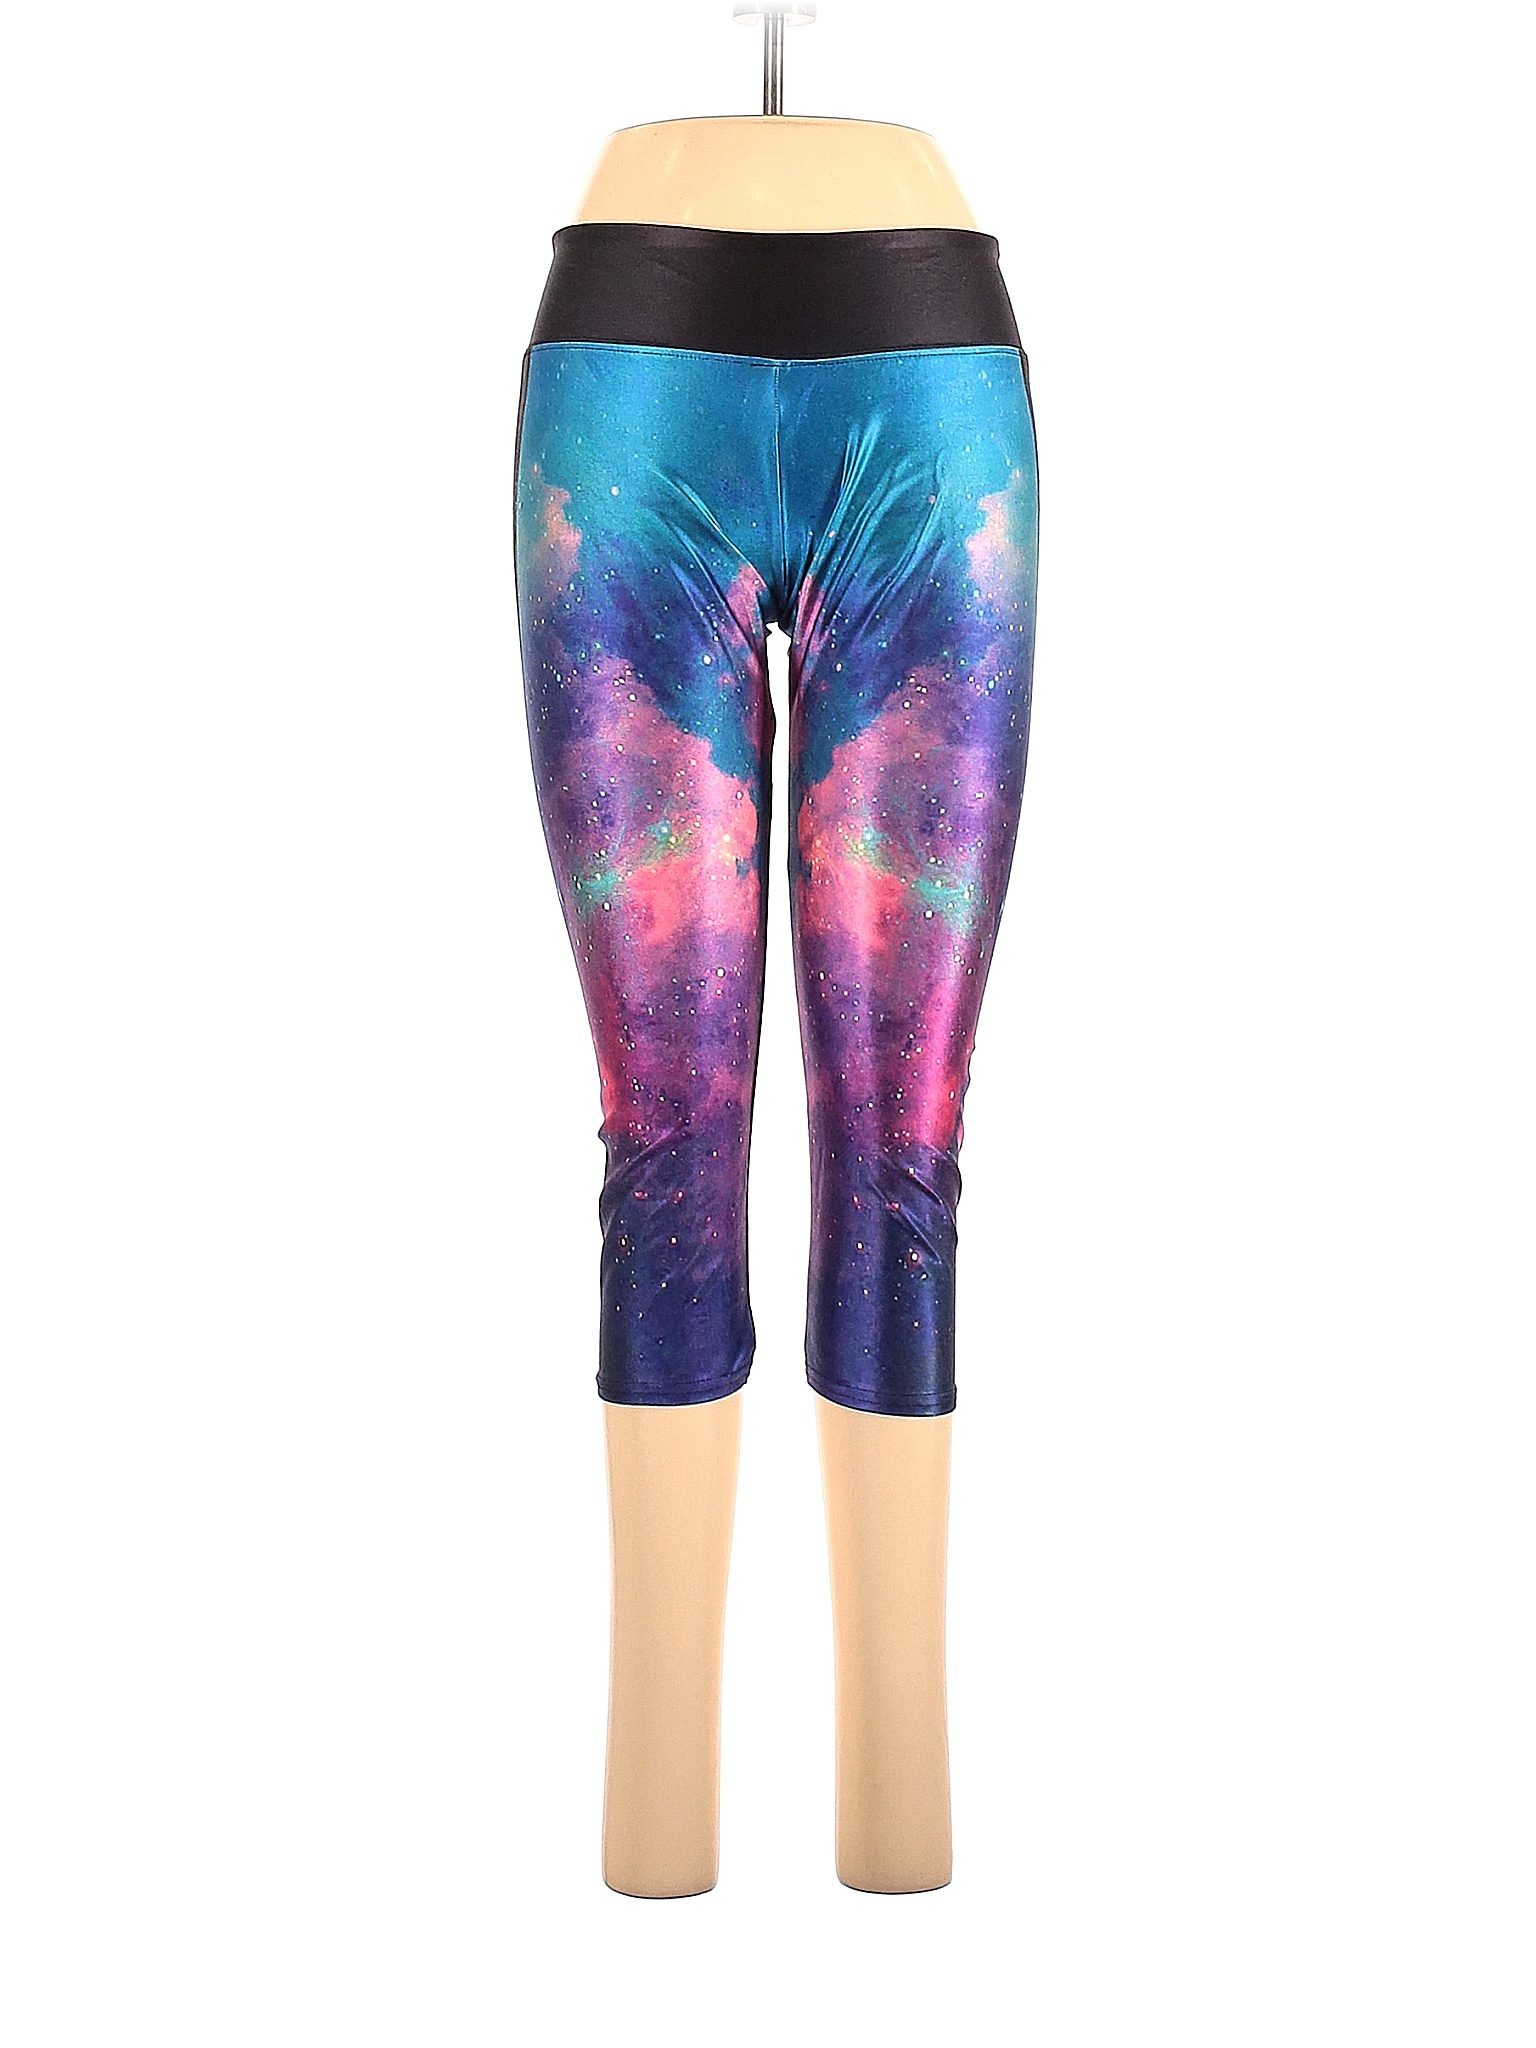 Online Legging Store Women's Clothing On Sale Up To 90% Off Retail